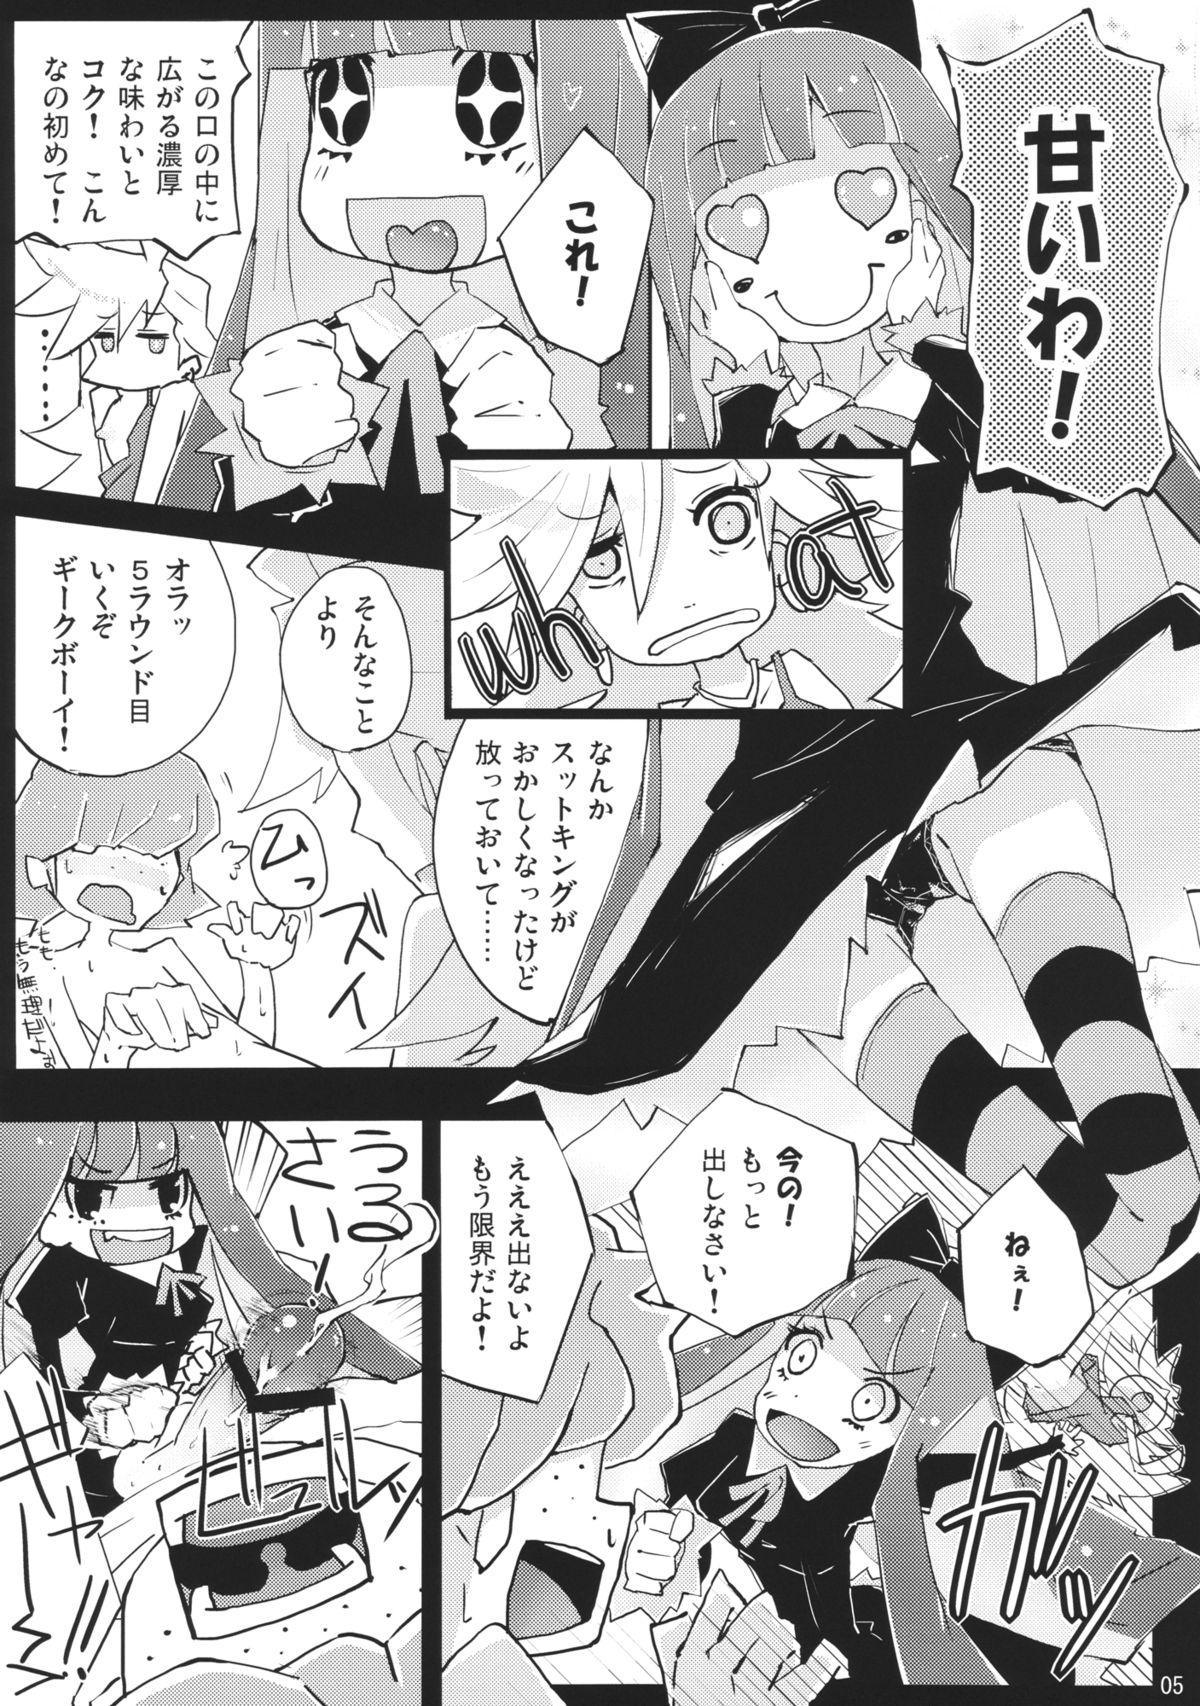 Teenpussy Taruta no Leche - Panty and stocking with garterbelt Pay - Page 5